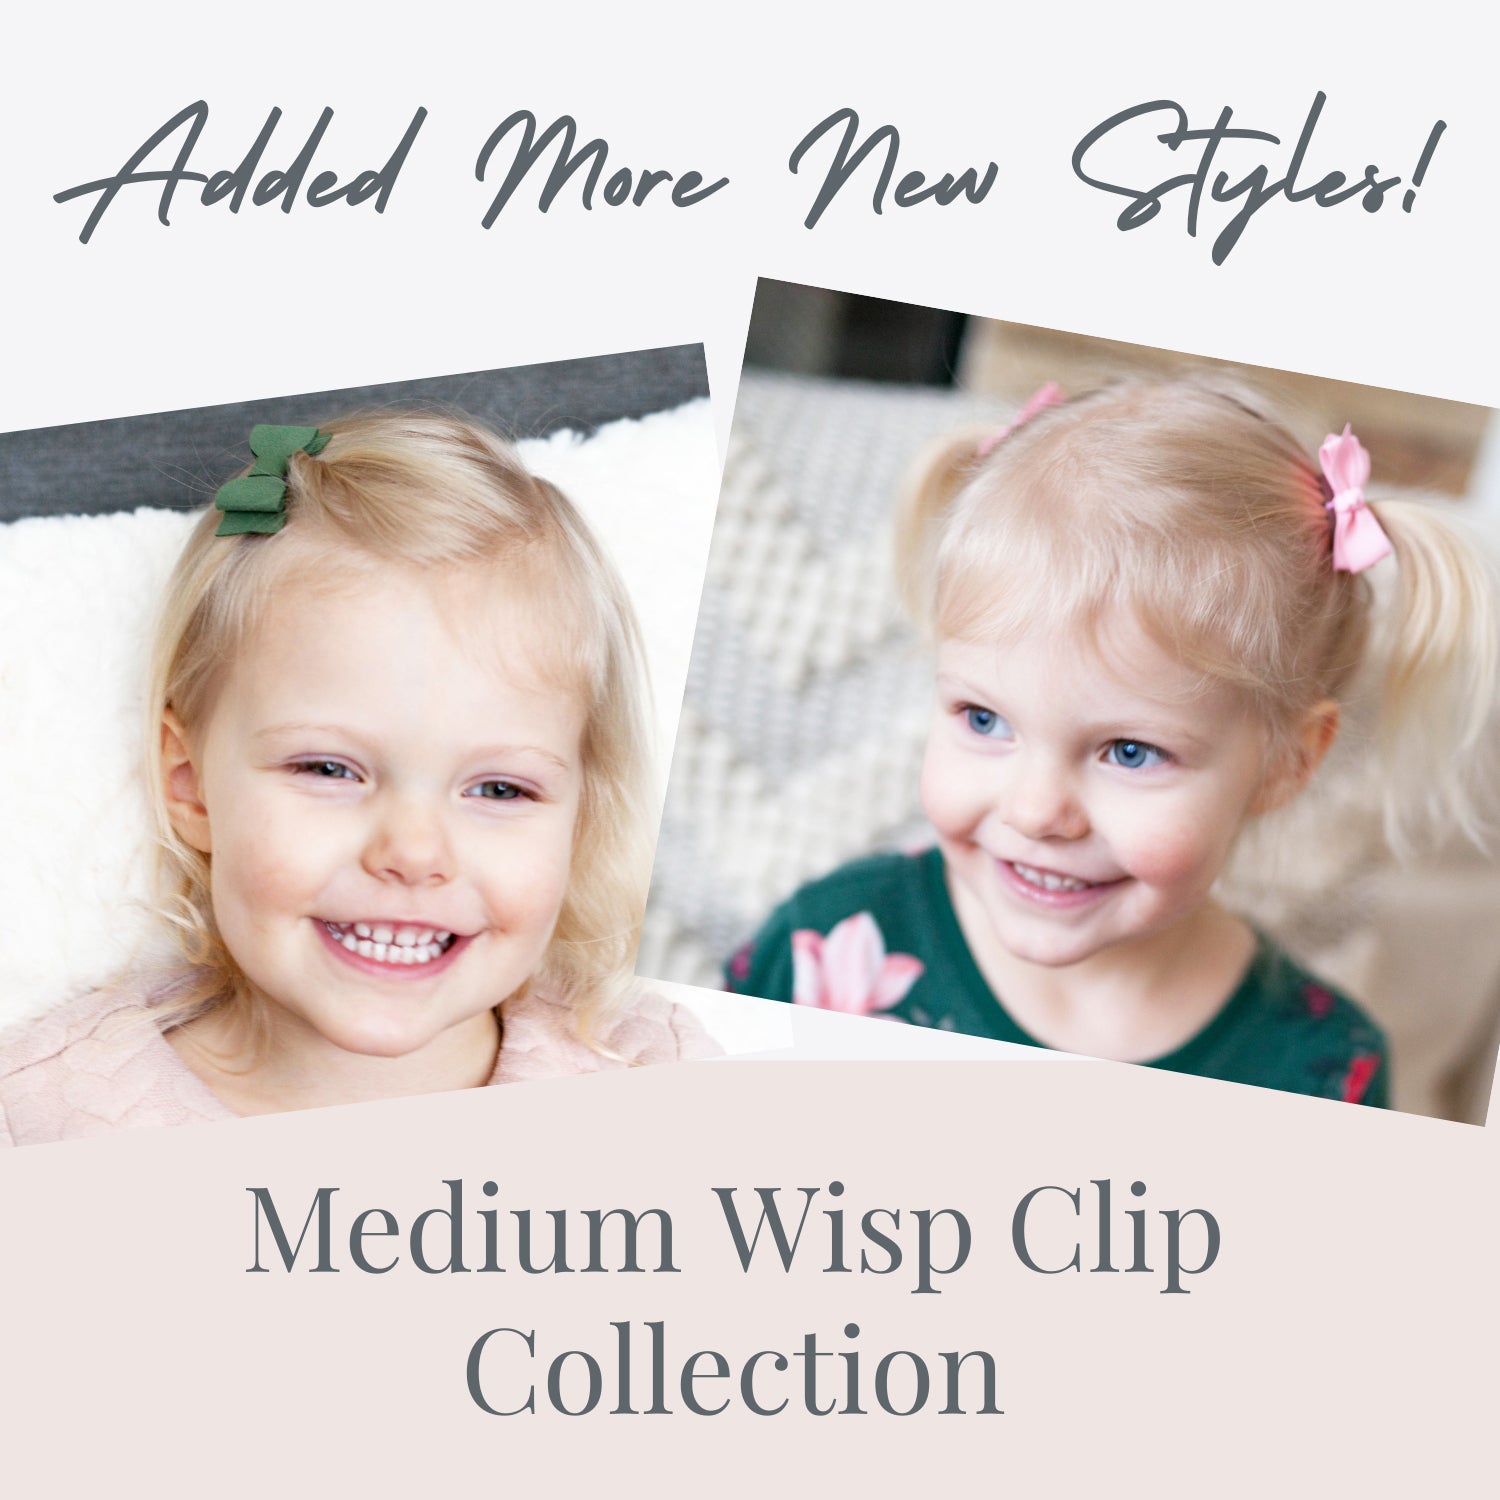 New Styles Added to our Medium Wisp Clip Collection: Billie Jean Bow & Aiyanna Bow